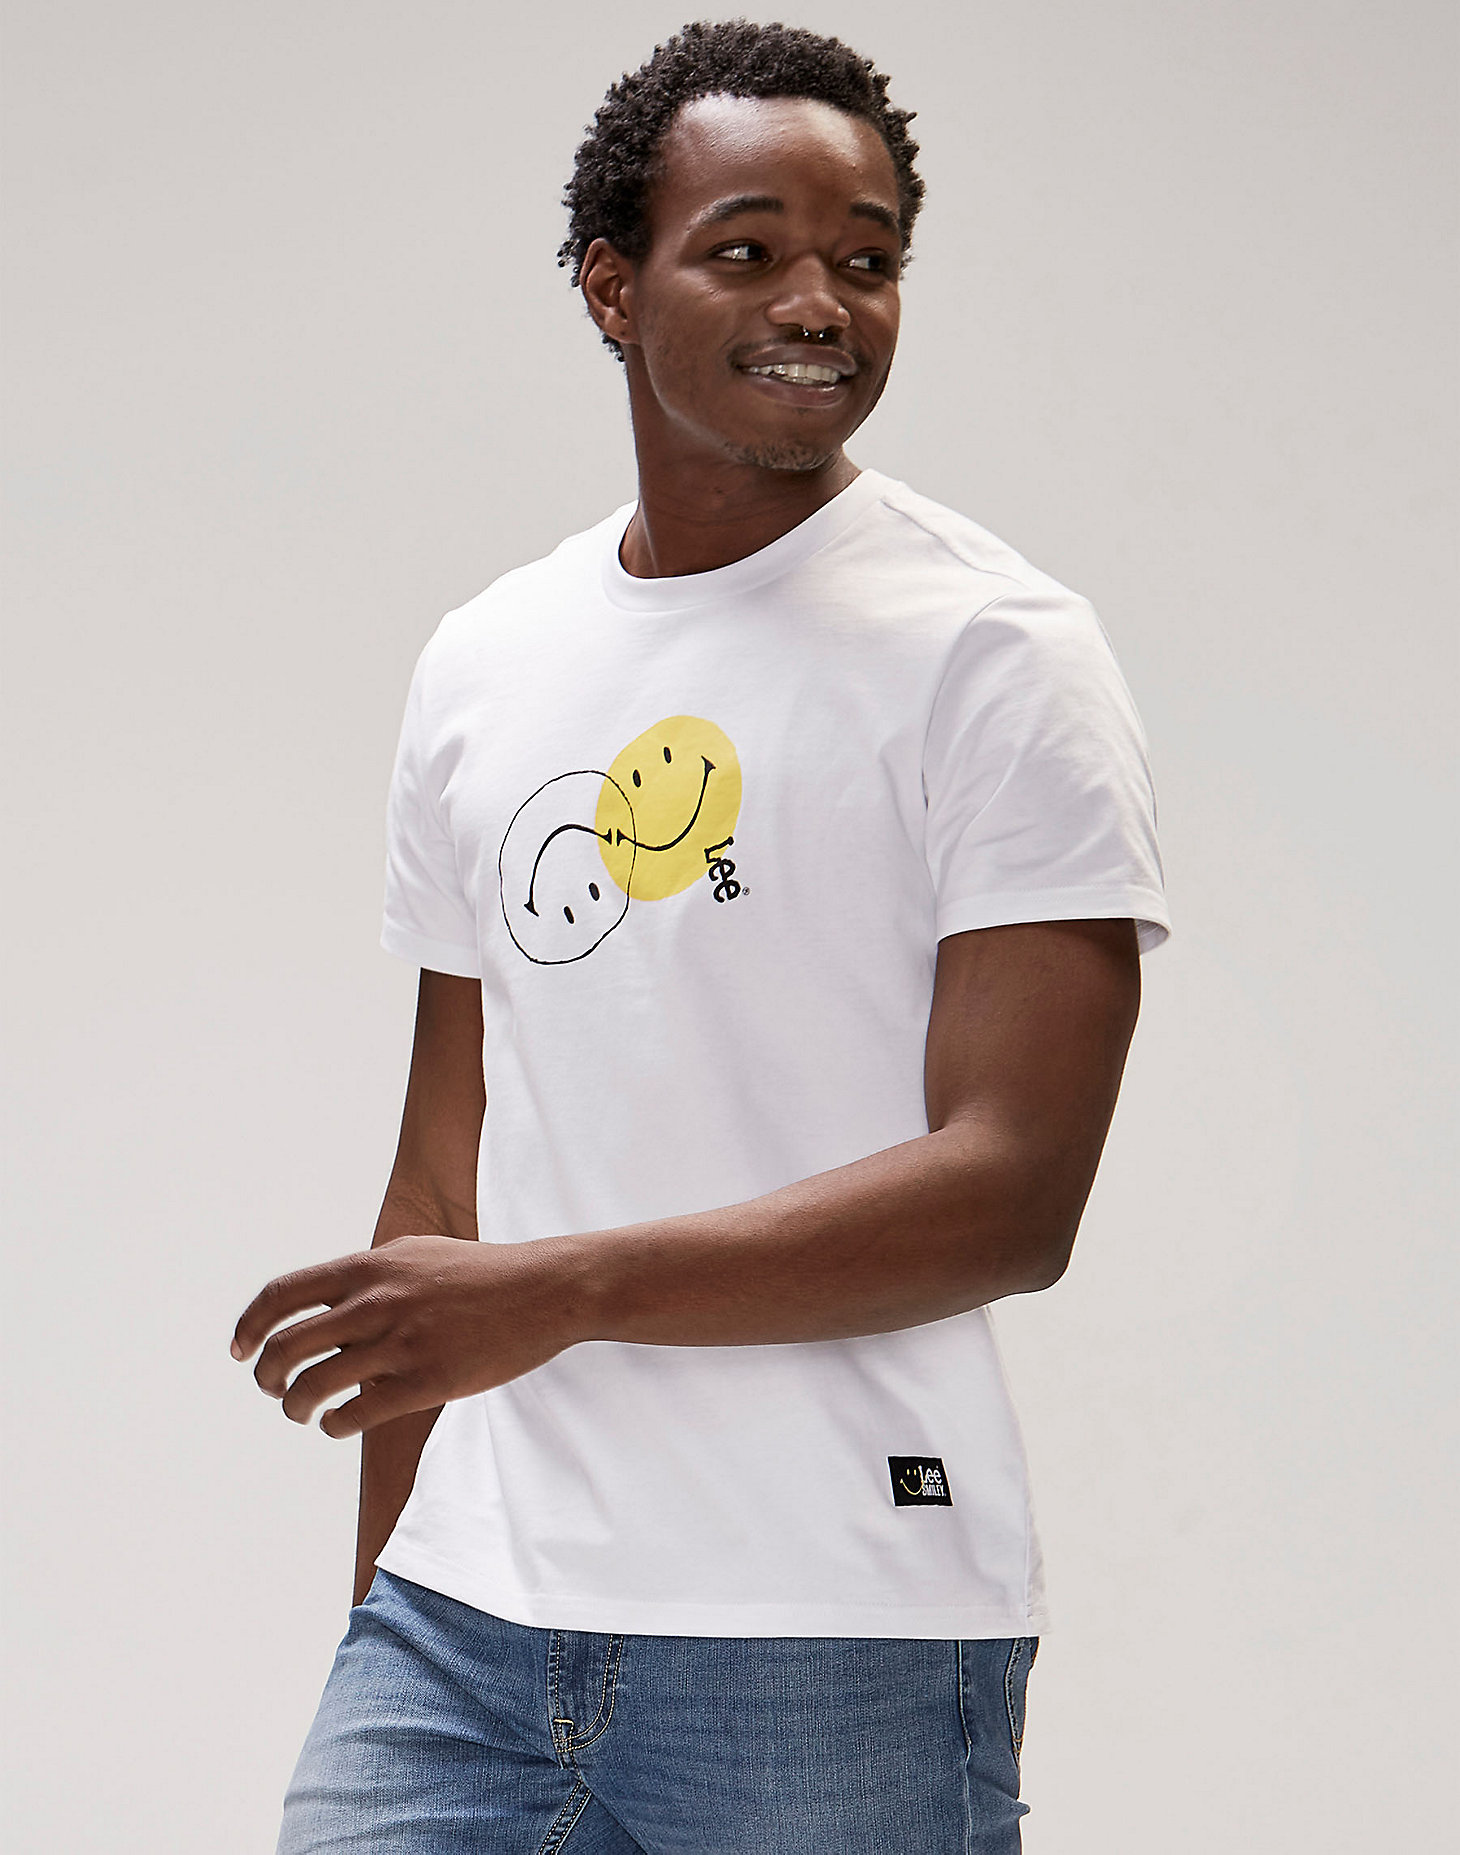 Men's Lee® X Smiley® Face Tee in White alternative view 5